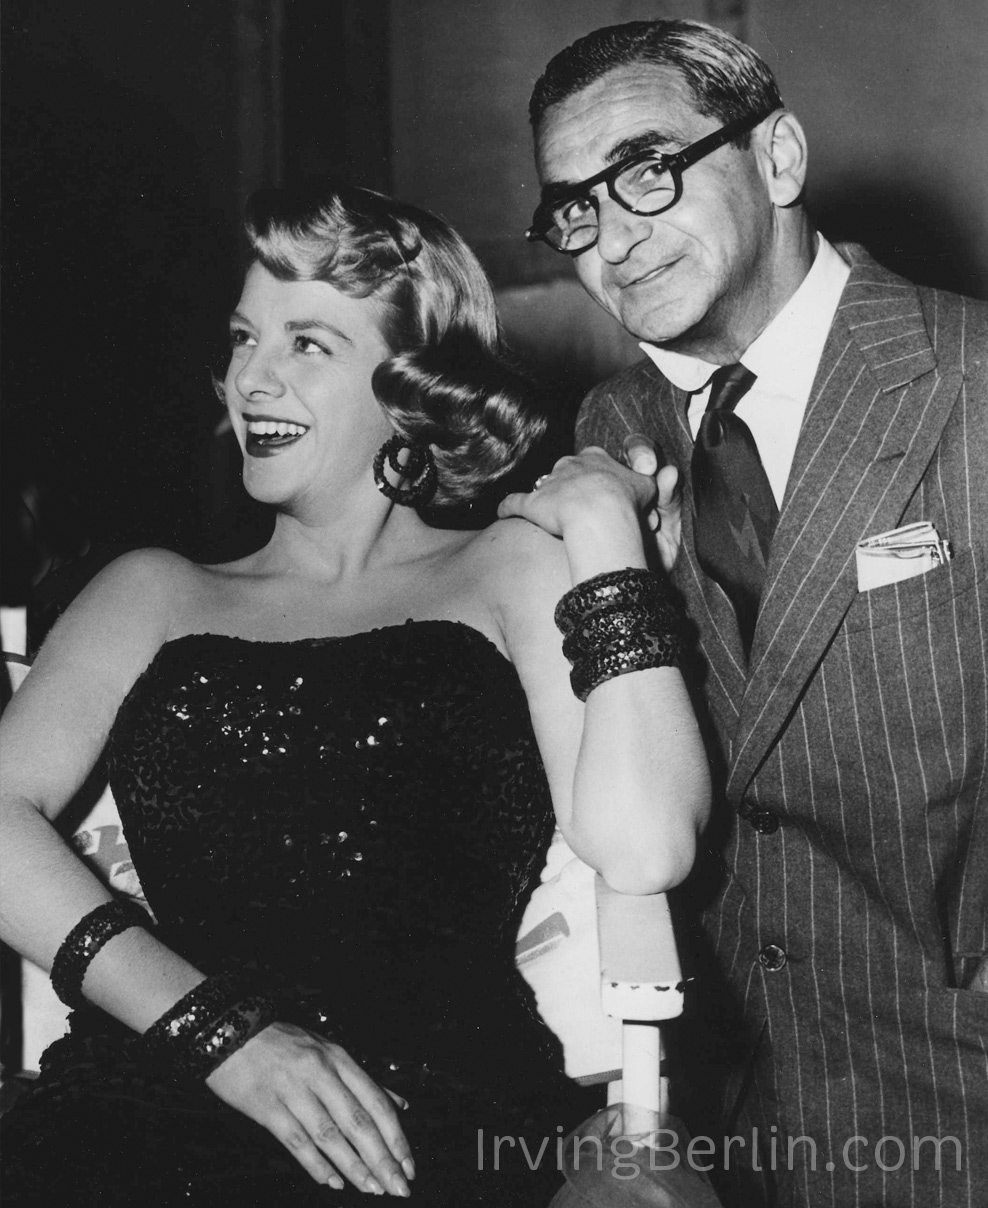  Irving Berlin with Rosemary Clooney 